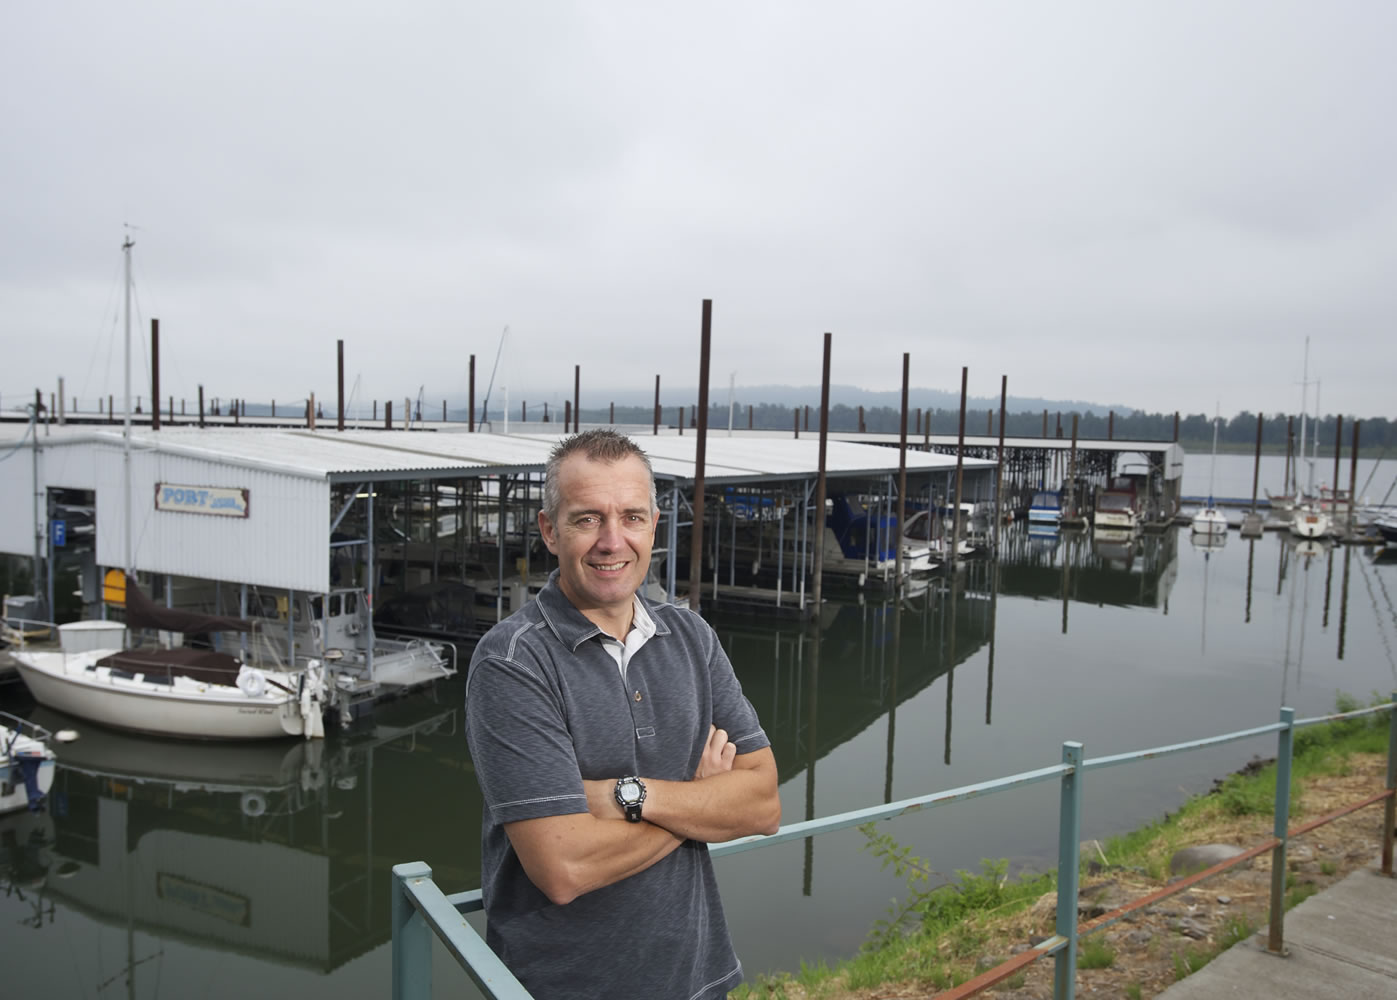 Speaking of the Port of Camas-Washougal's plan to revitalize a waterfront property, including building new recreational facilities, David Ripp, the port's executive director, says: &quot;We're taking taxpayer dollars and doing something taxpayers want to see and will be able to utilize.&quot;